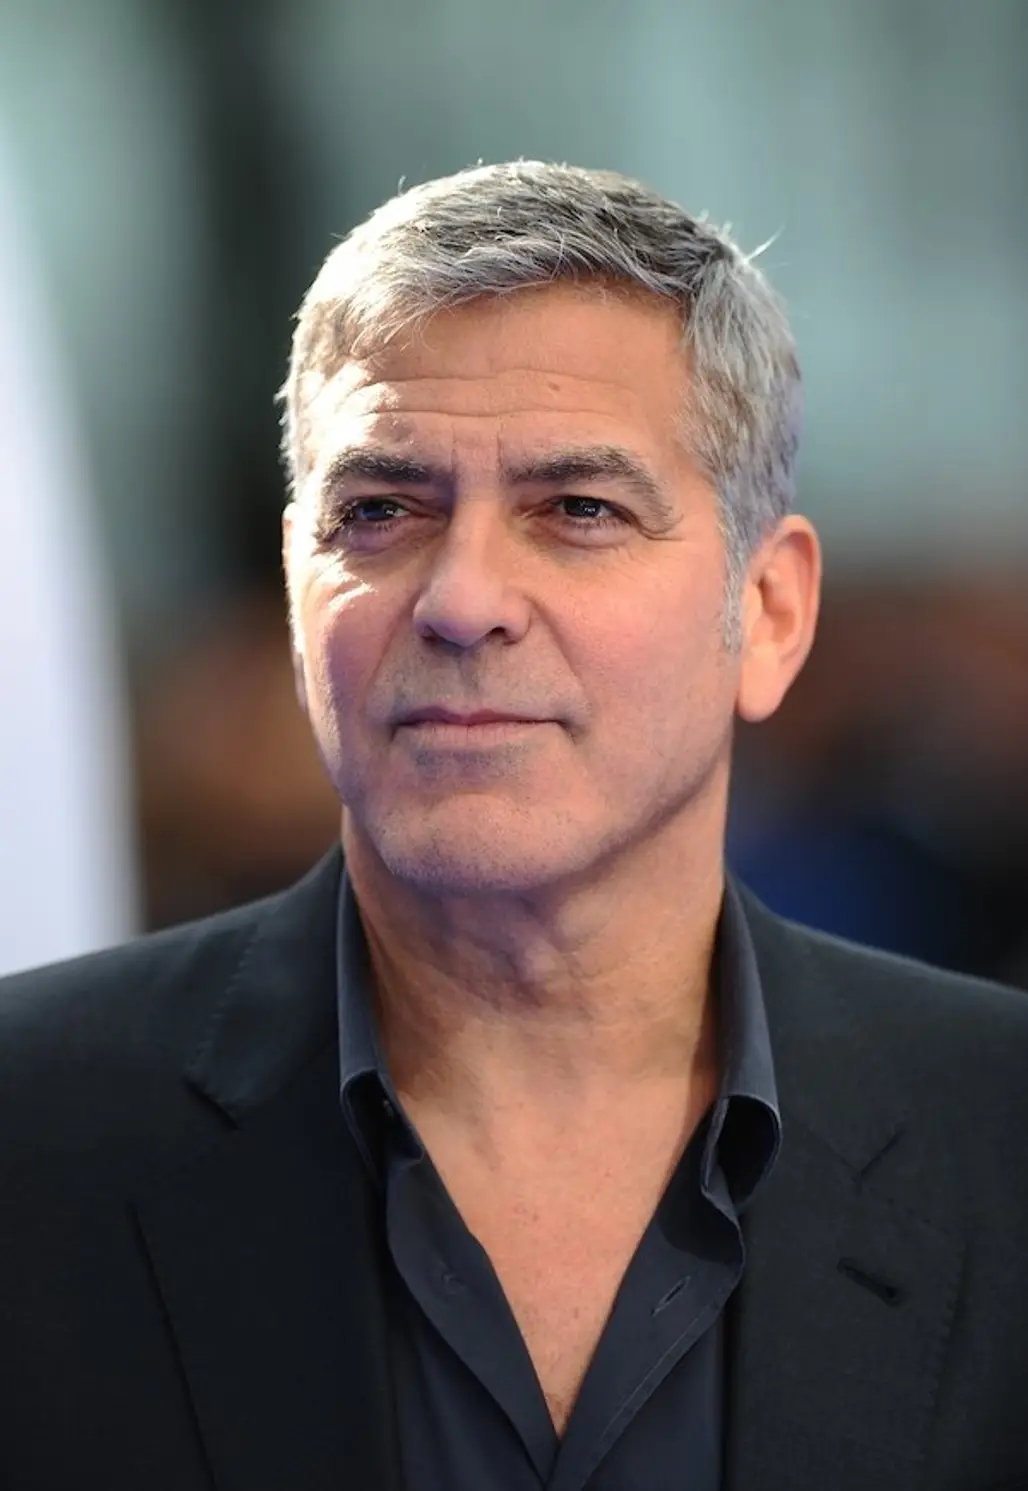 28 Silver Foxes That Will Definitely Persuade You to Date an Older Man ...